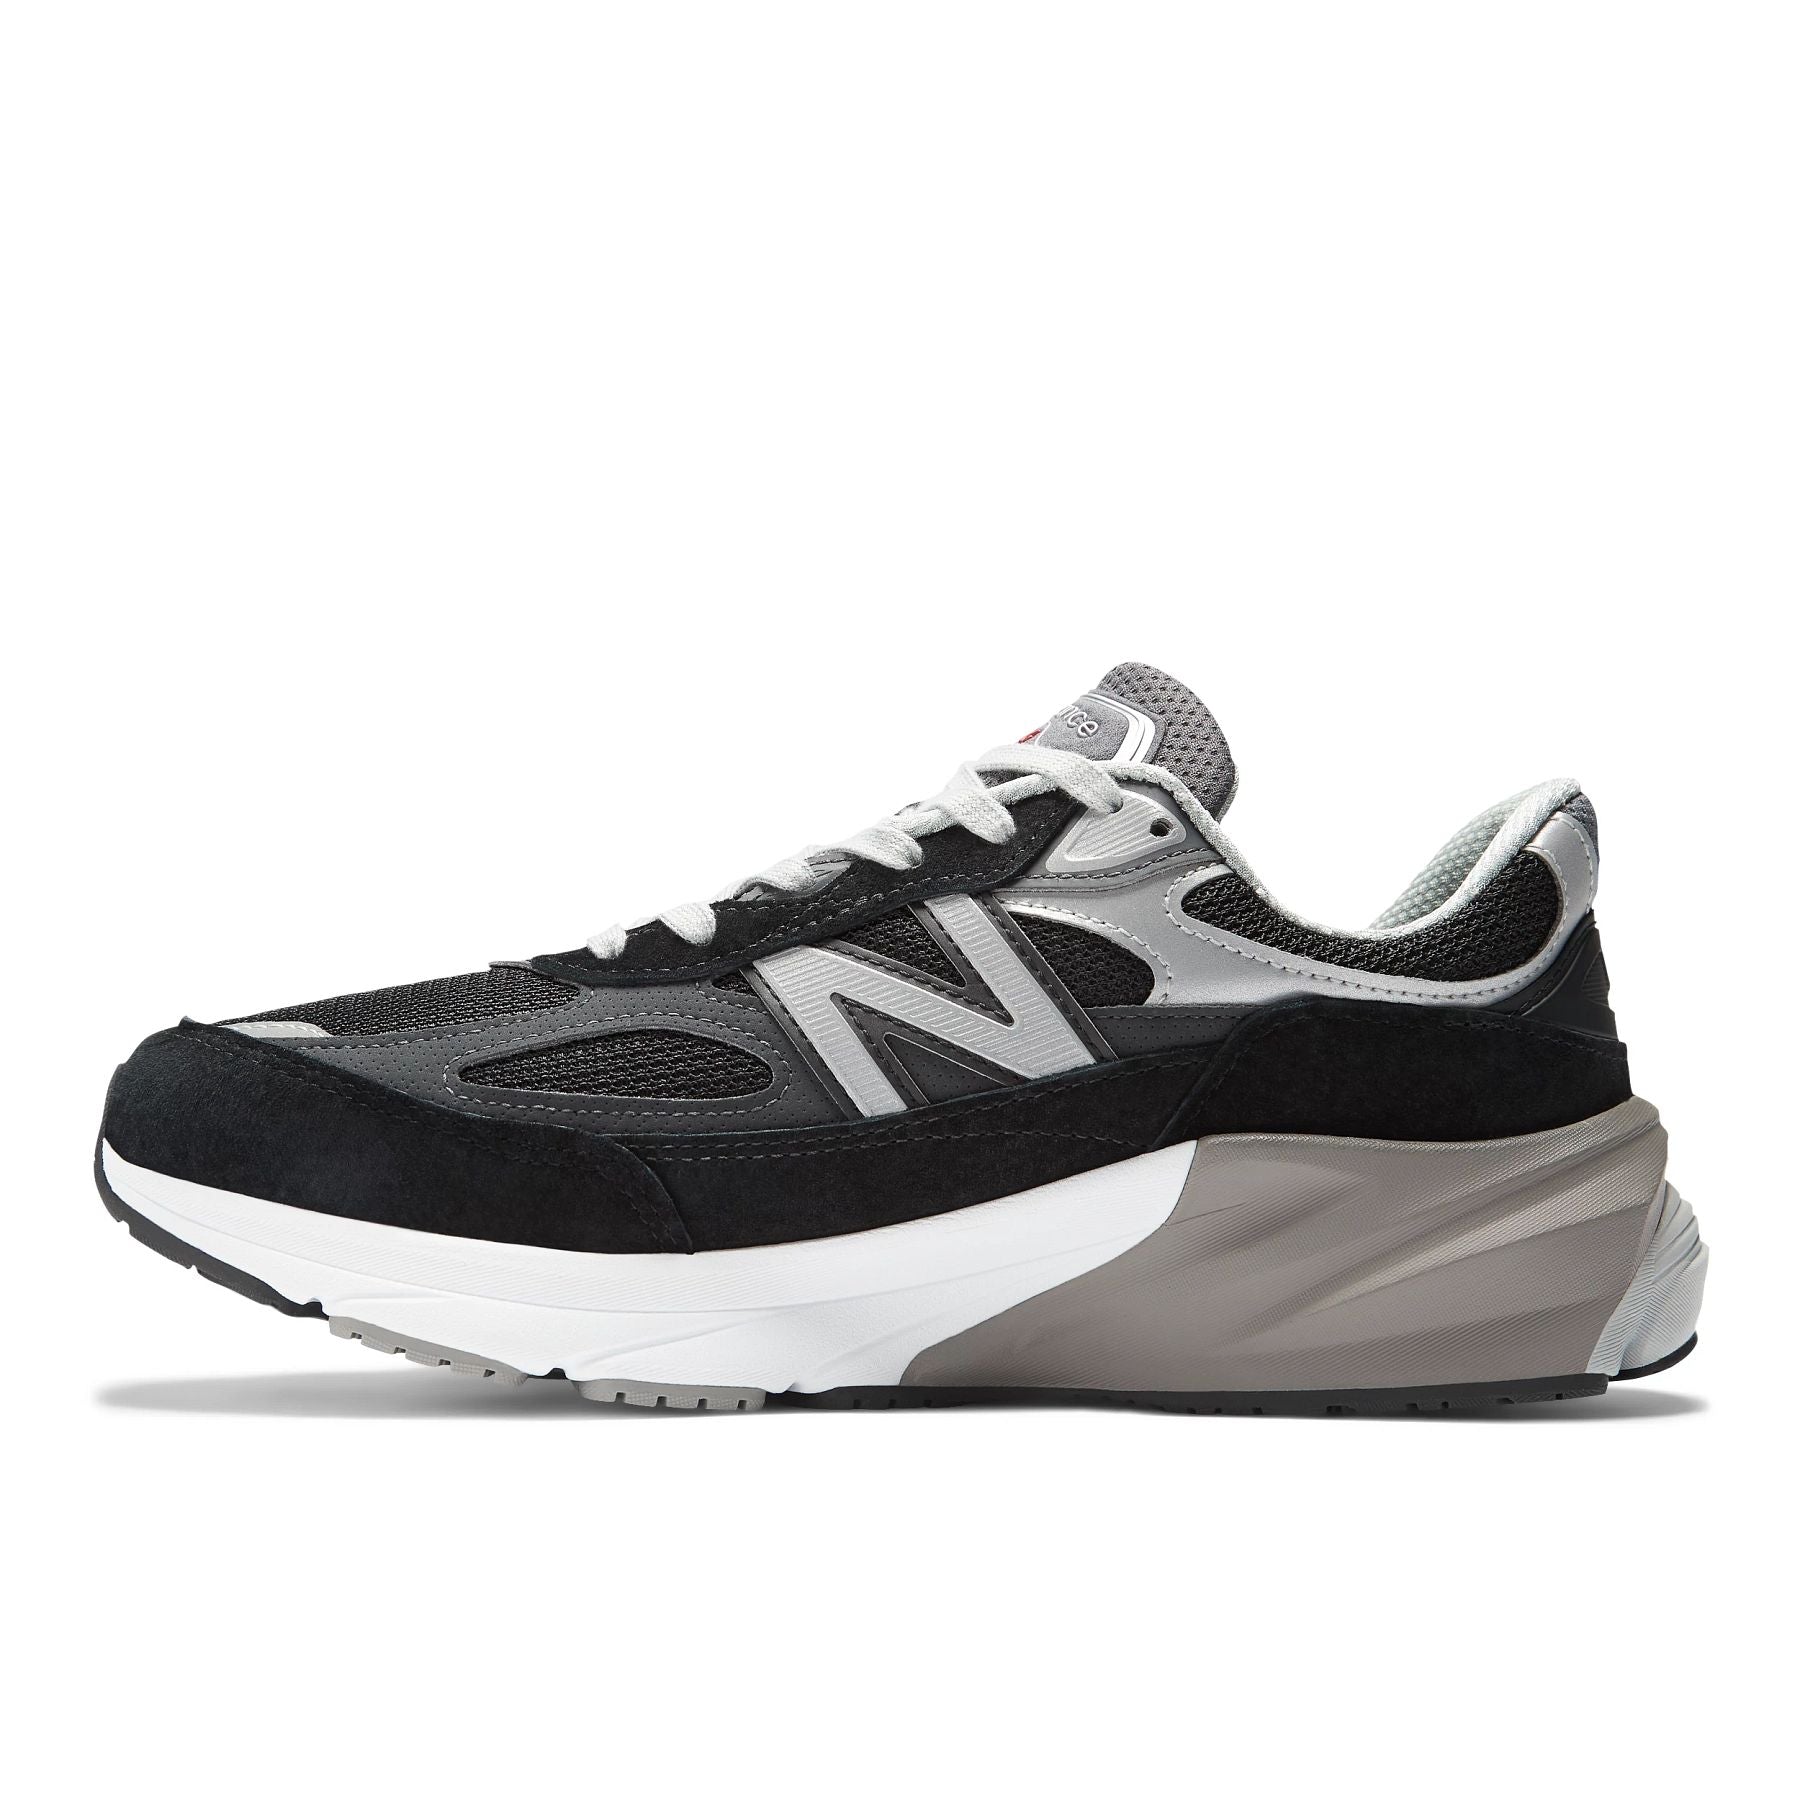 Medial view of the Men's New Balance 990 V6 lifestyle shoe in Black/White